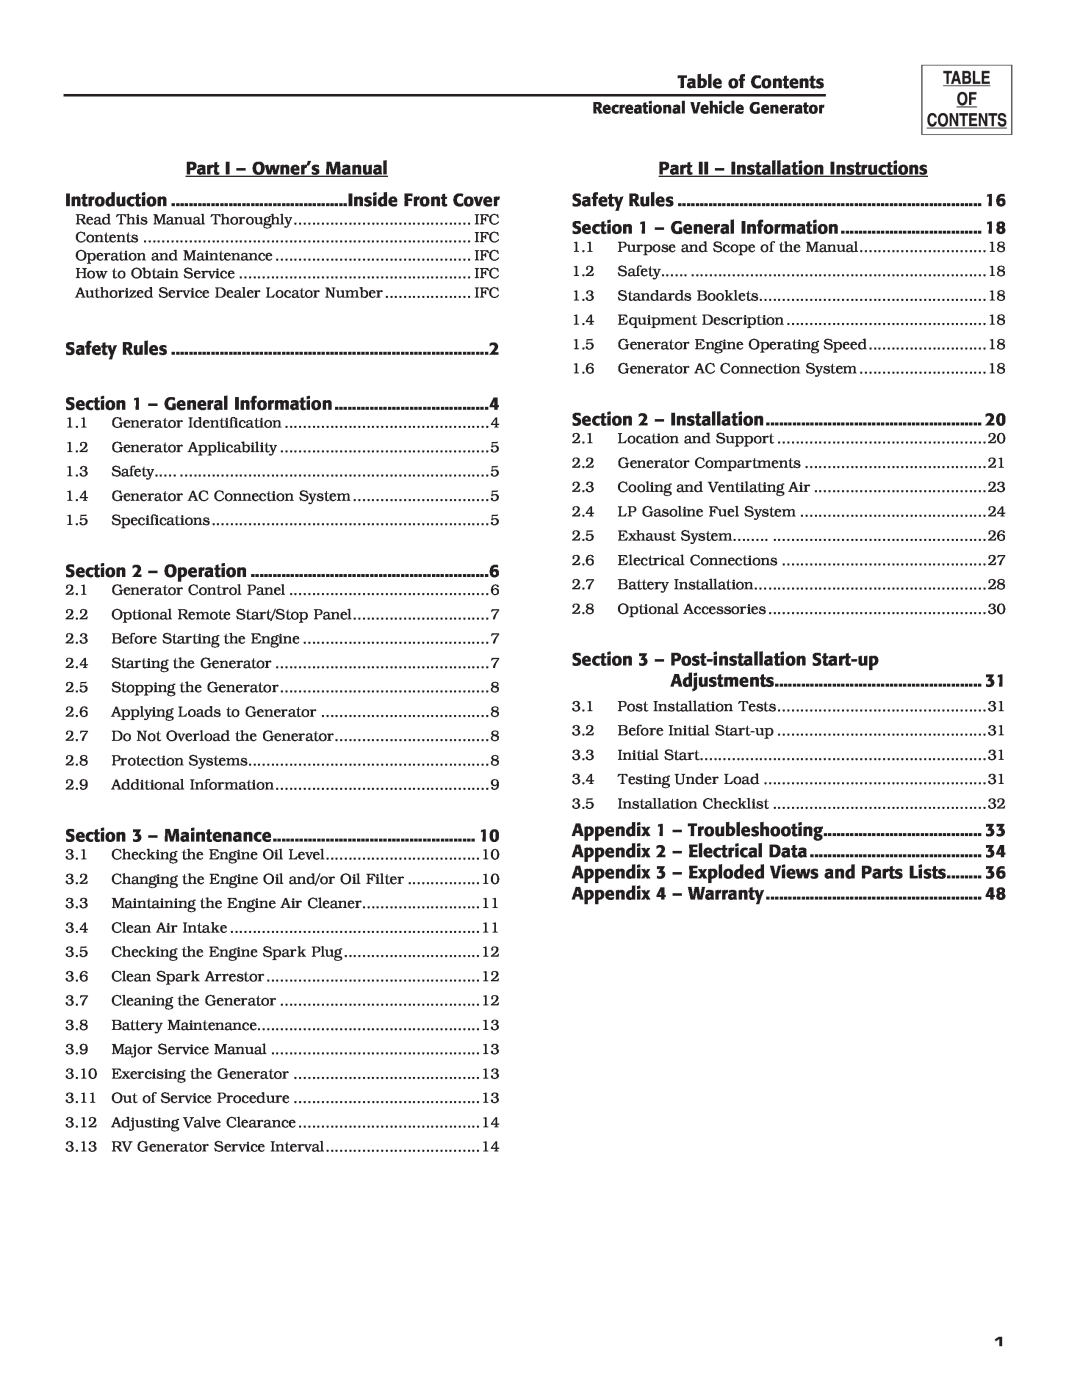 Guardian Technologies 004701-0 owner manual Table of Contents 